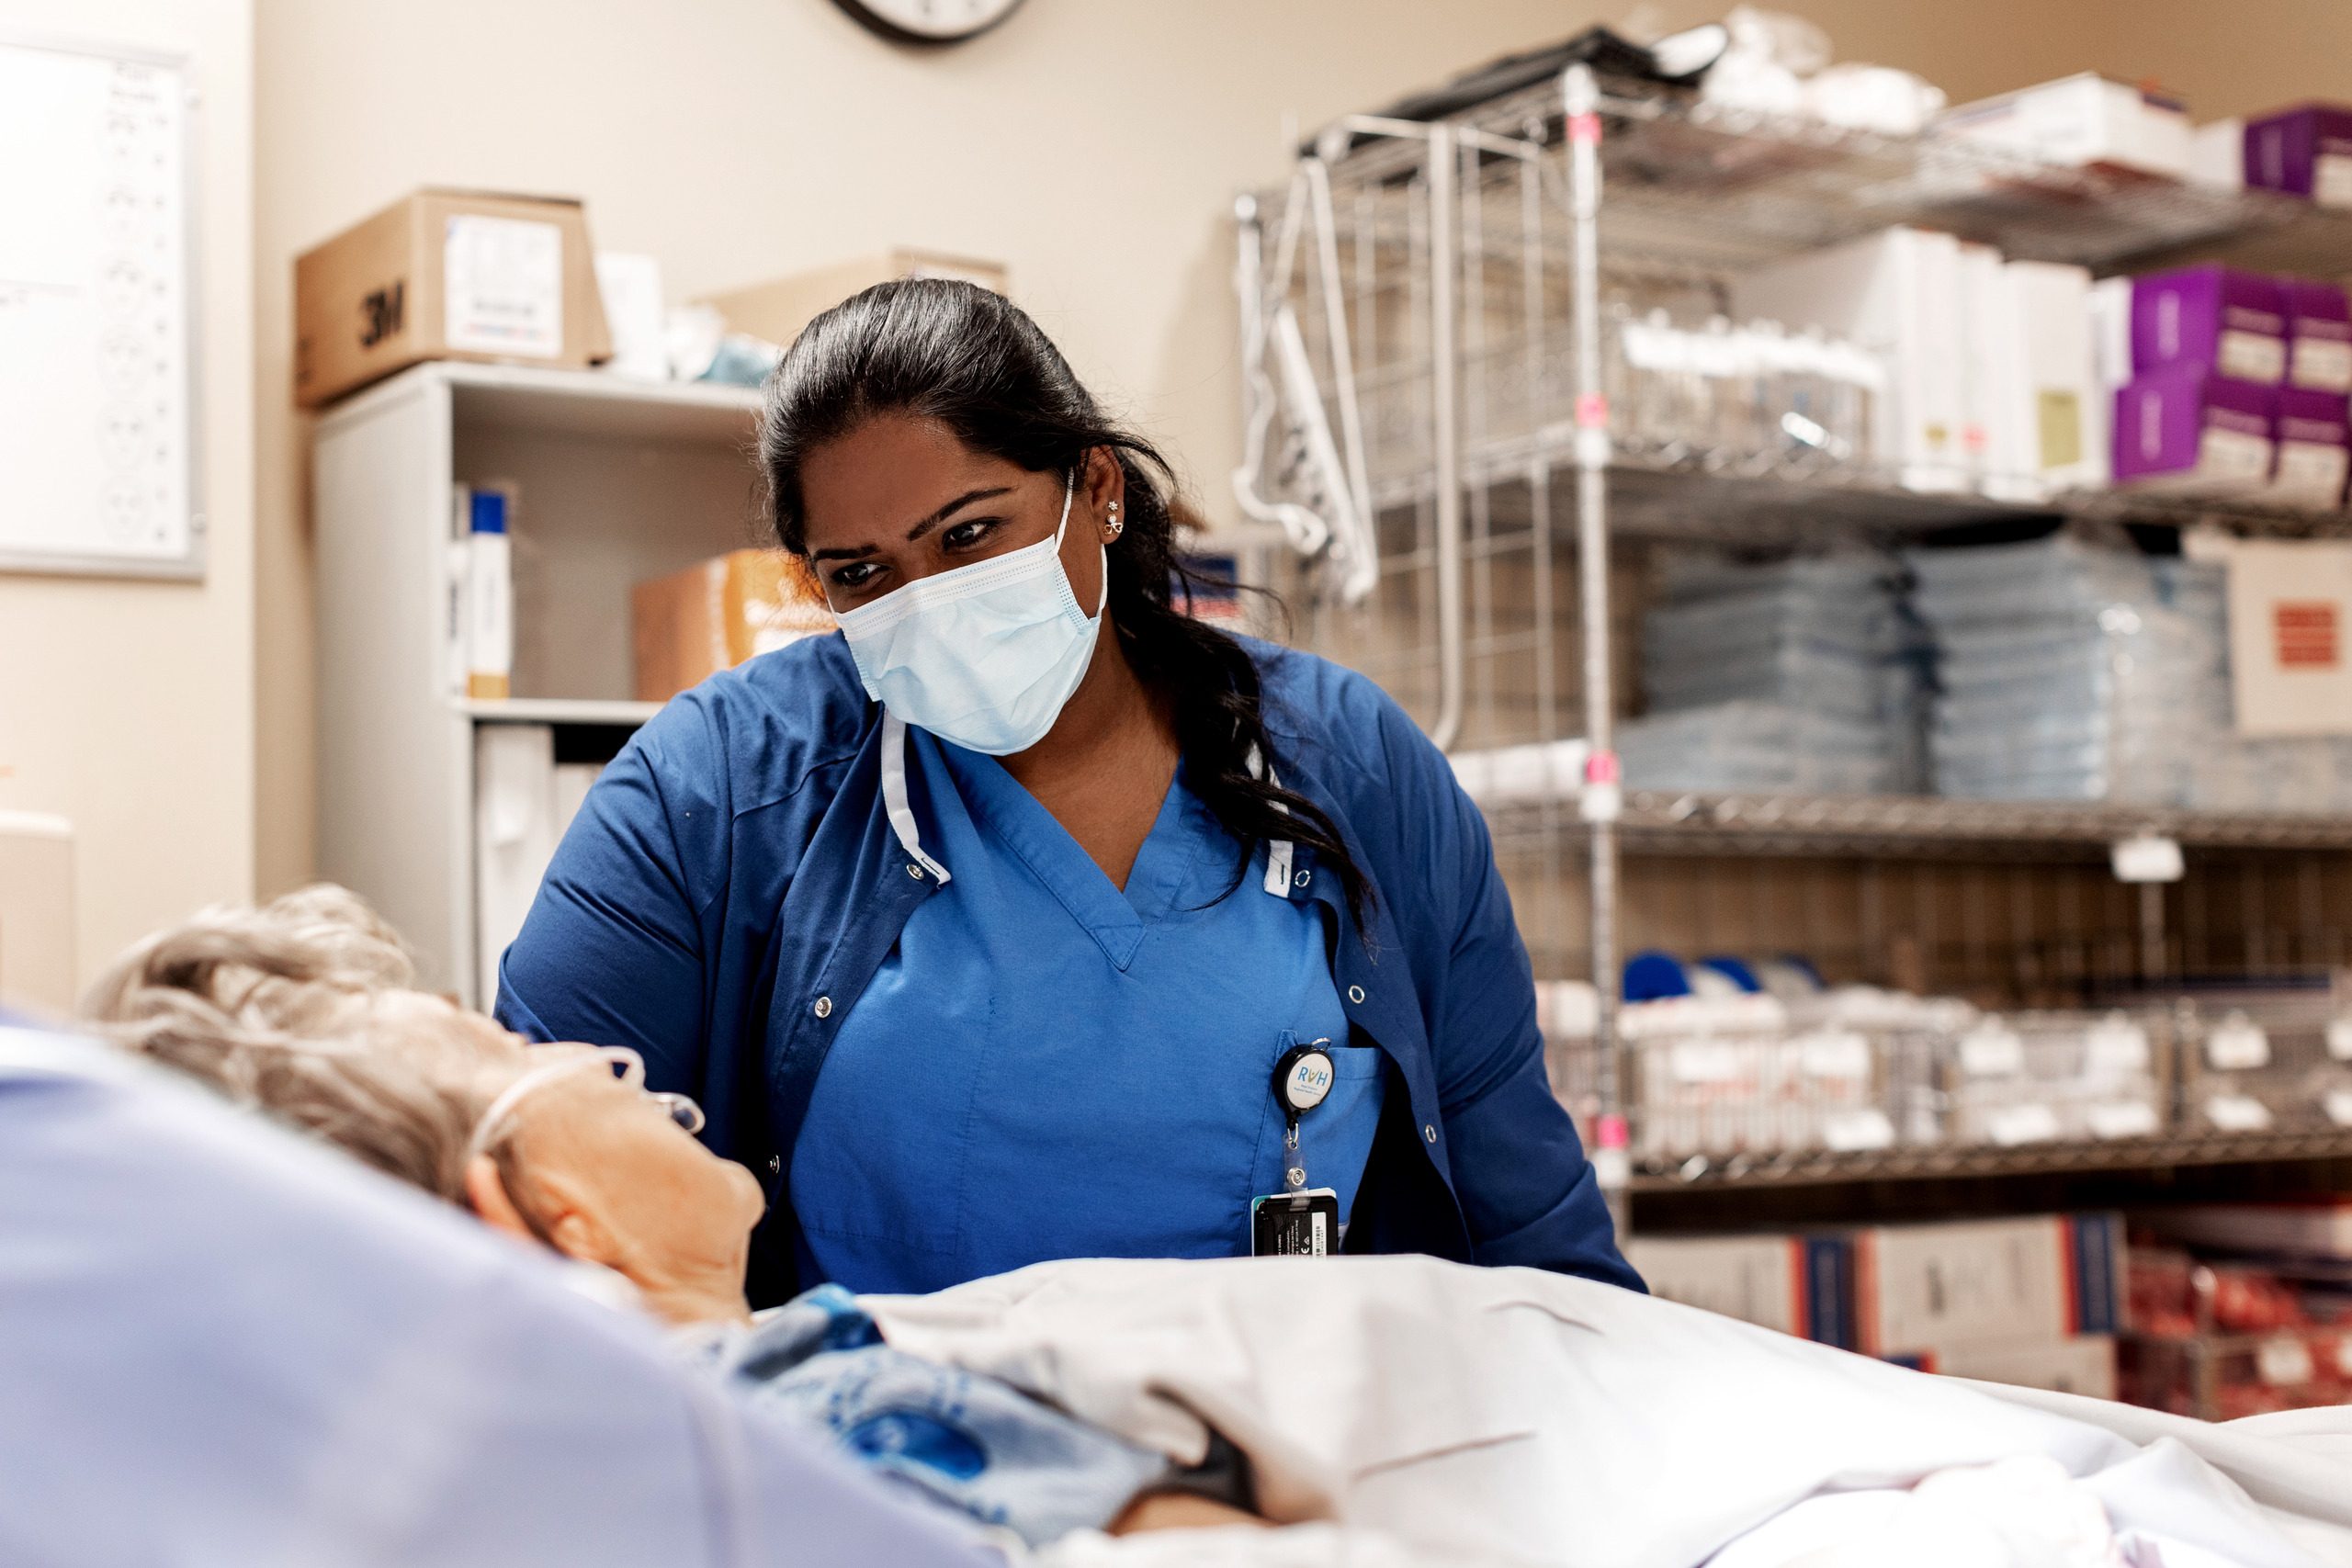 A healthcare worker wearing blue scrubs and a face mask stands next to a patient's bed and looks down at them.